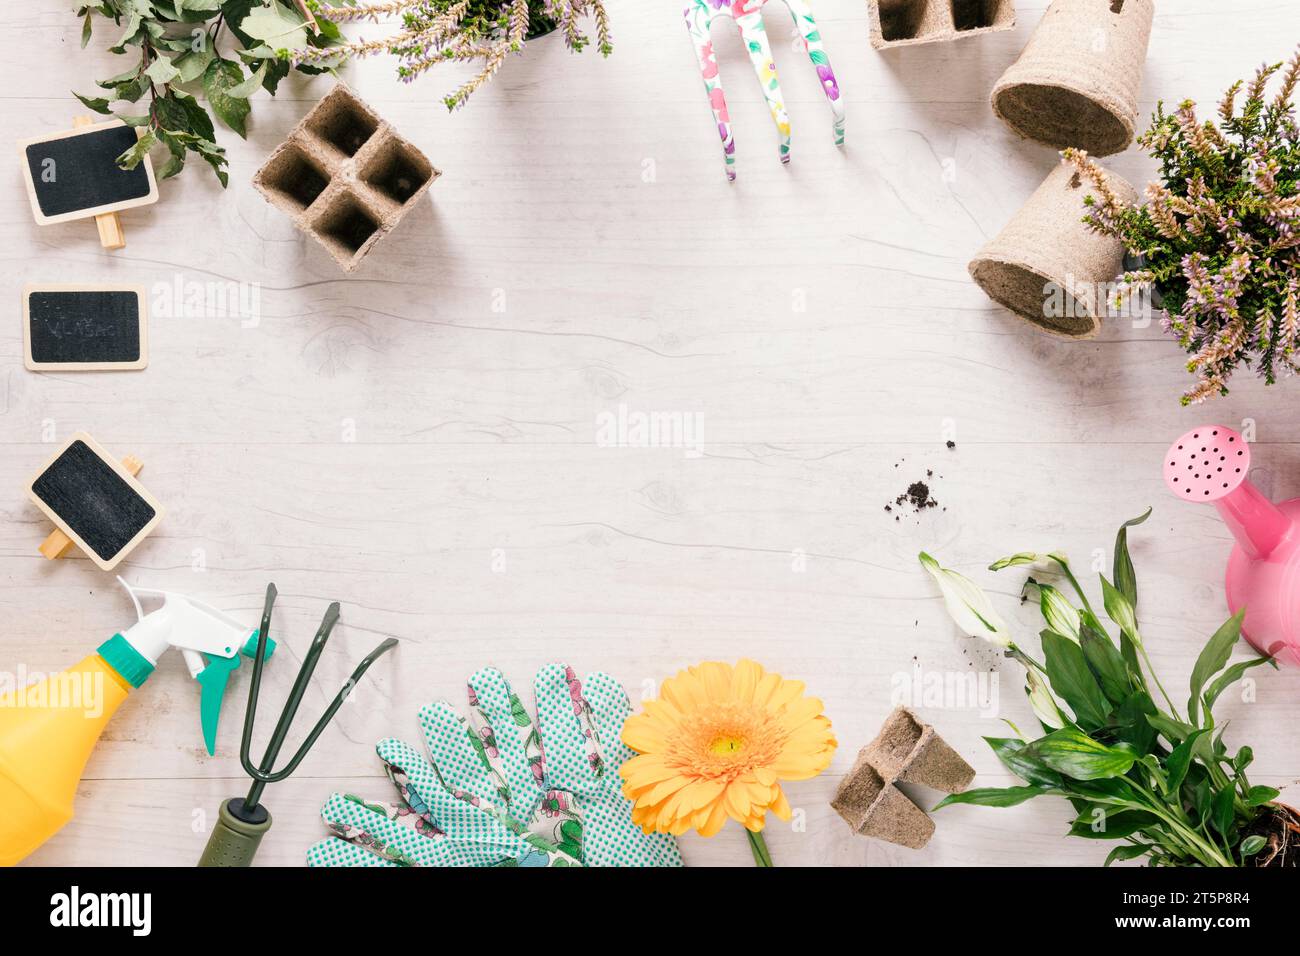 High angle view plant gardening glove flower rake sprayer watering can peat tray stake wooden desk Stock Photo